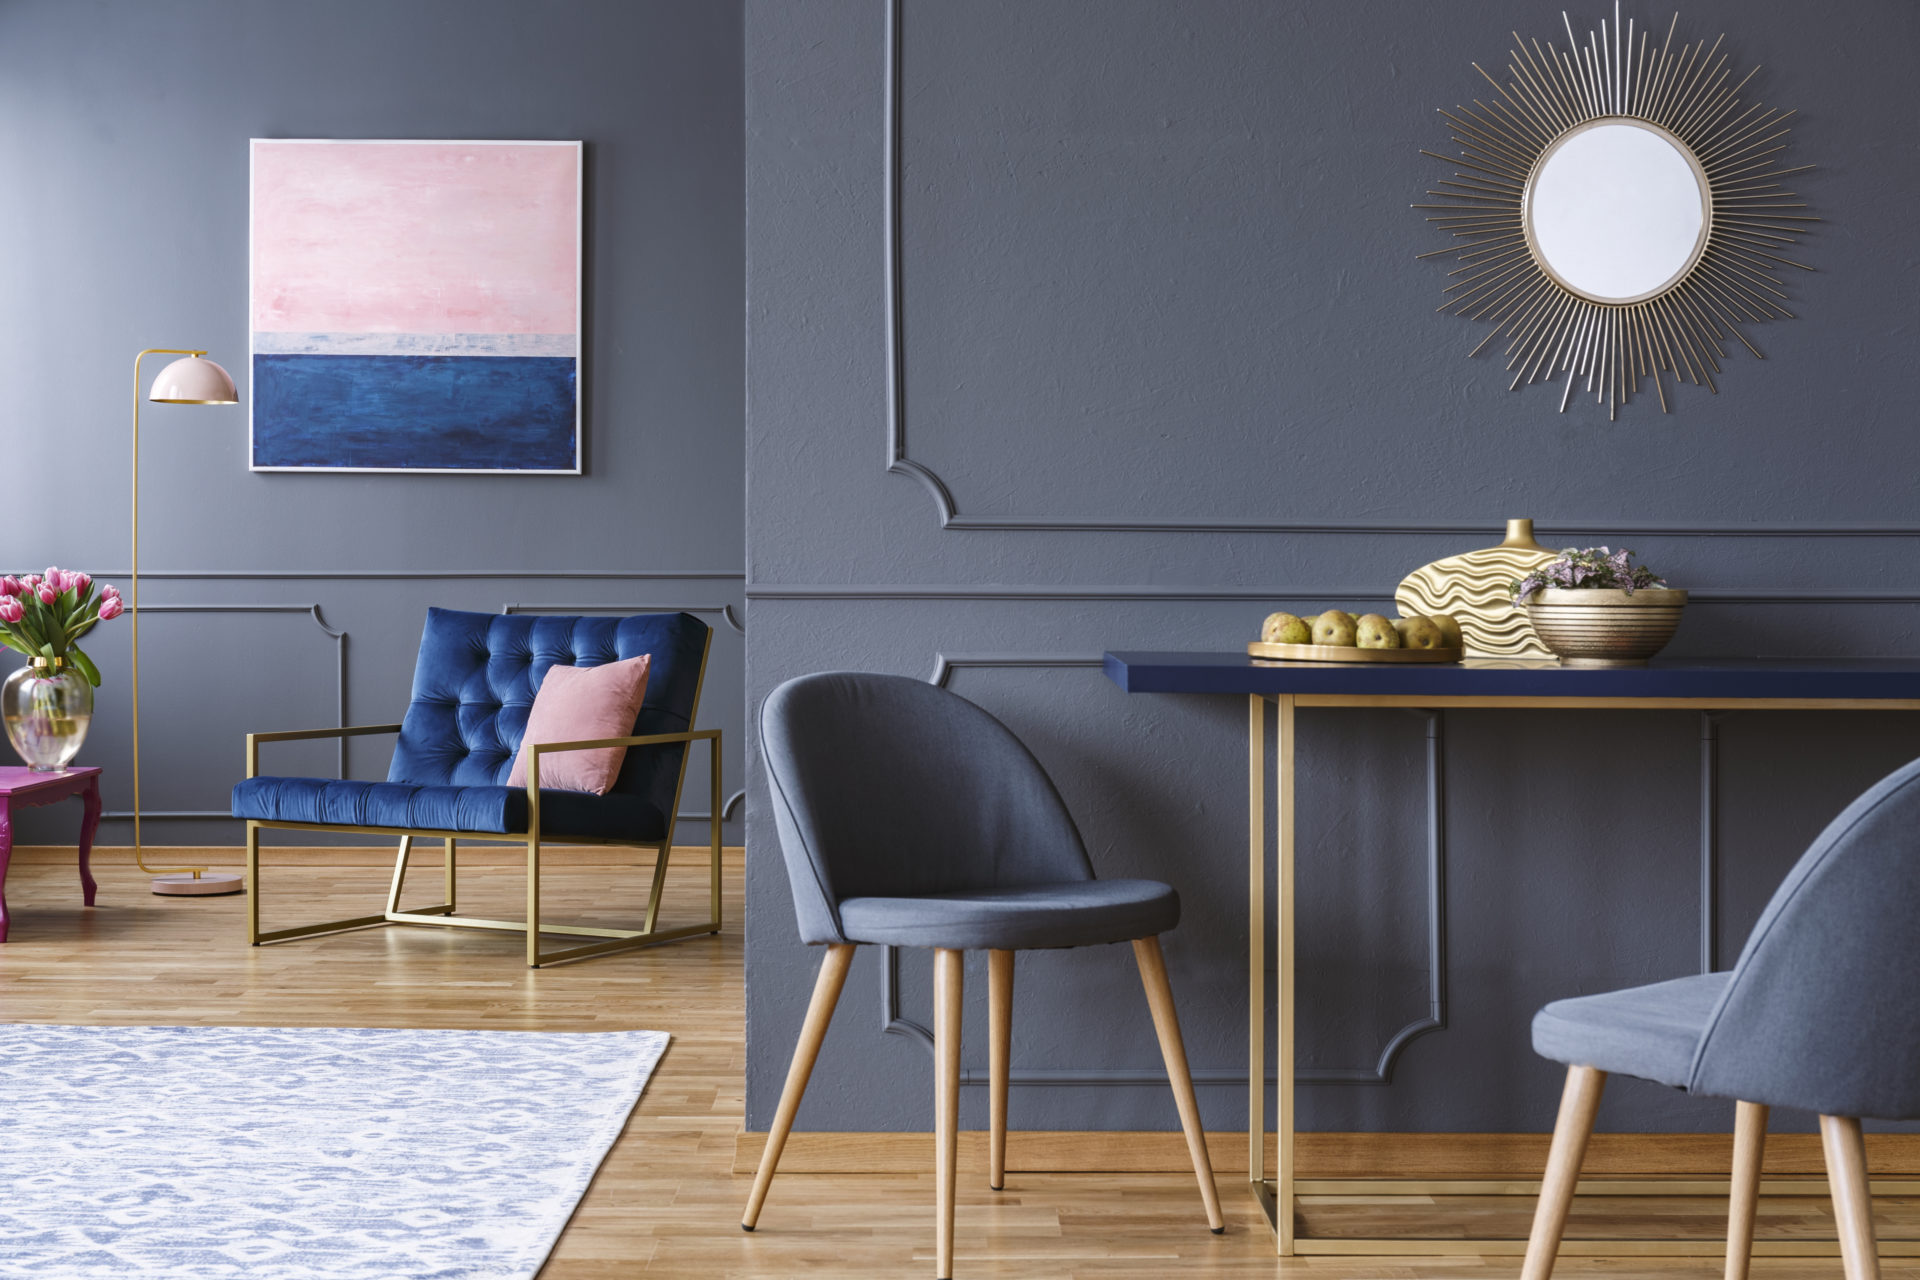 Chair At Table In Modern Grey Apartment Interior With Navy Blue Armchair, Painting And Mirror